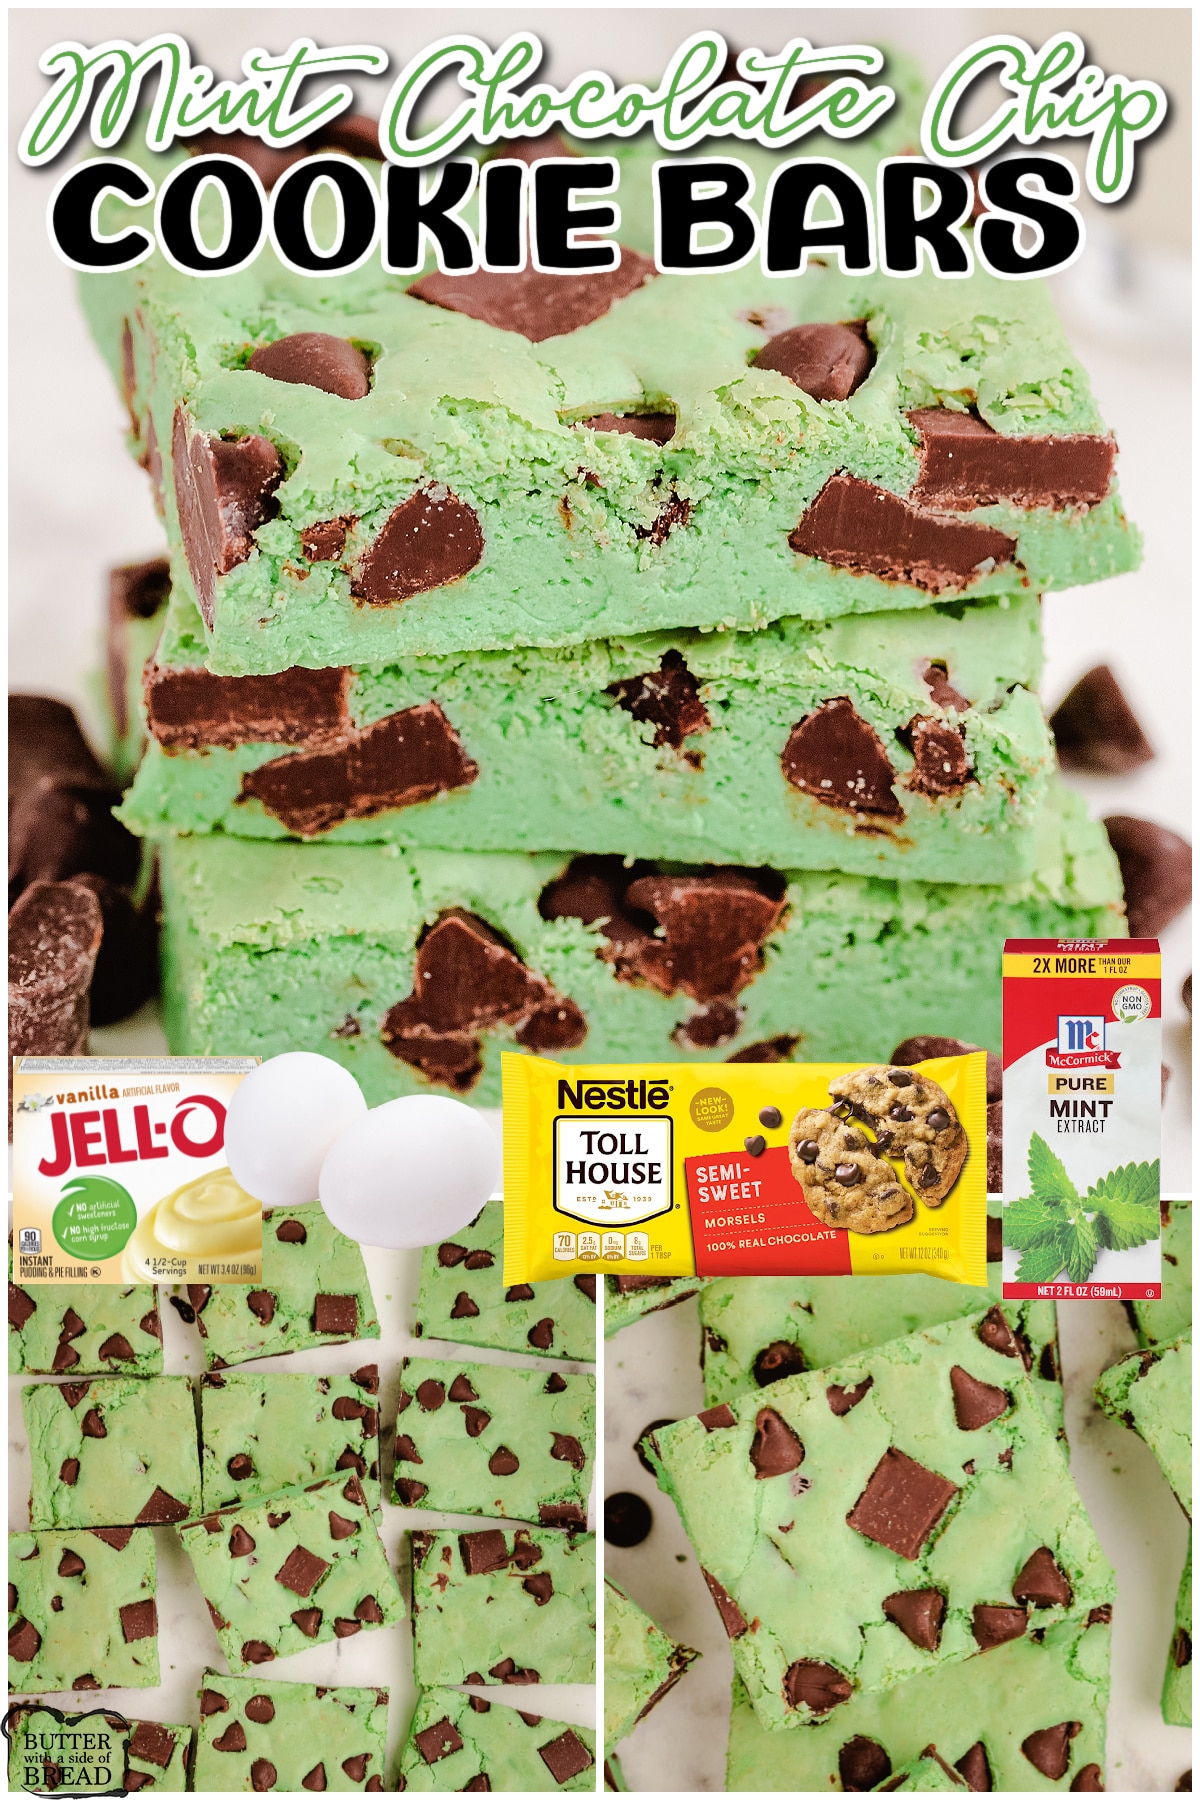 Mint chocolate chip cookie bars are the perfect mint green St. Patrick's Day dessert! Made from scratch with simple ingredients and steps these chewy cookie bars are always a fun treat.